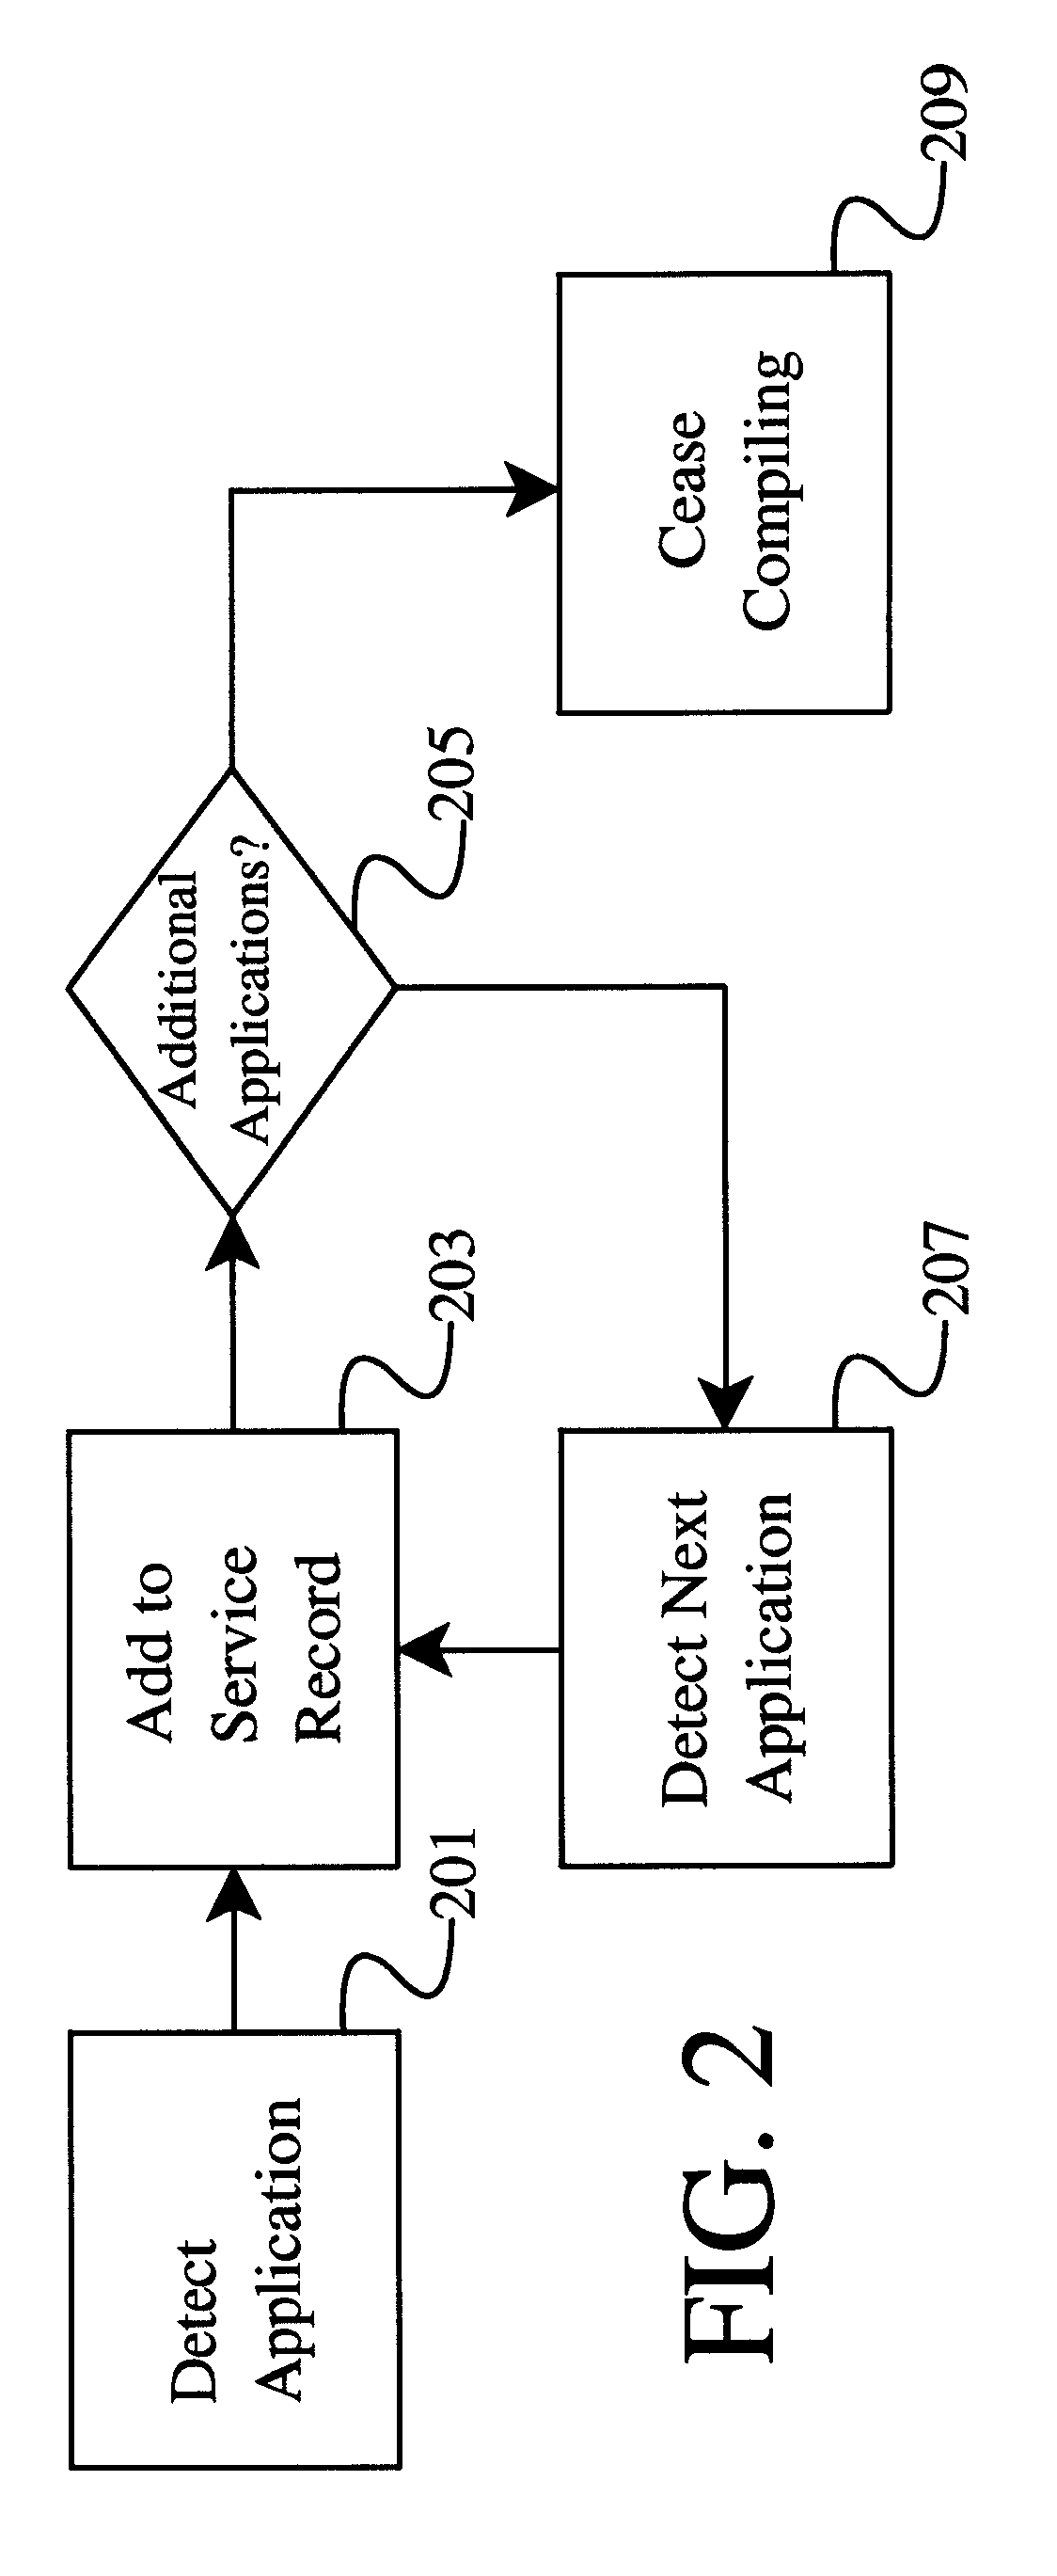 Methods and apparatus for remote activation of an application